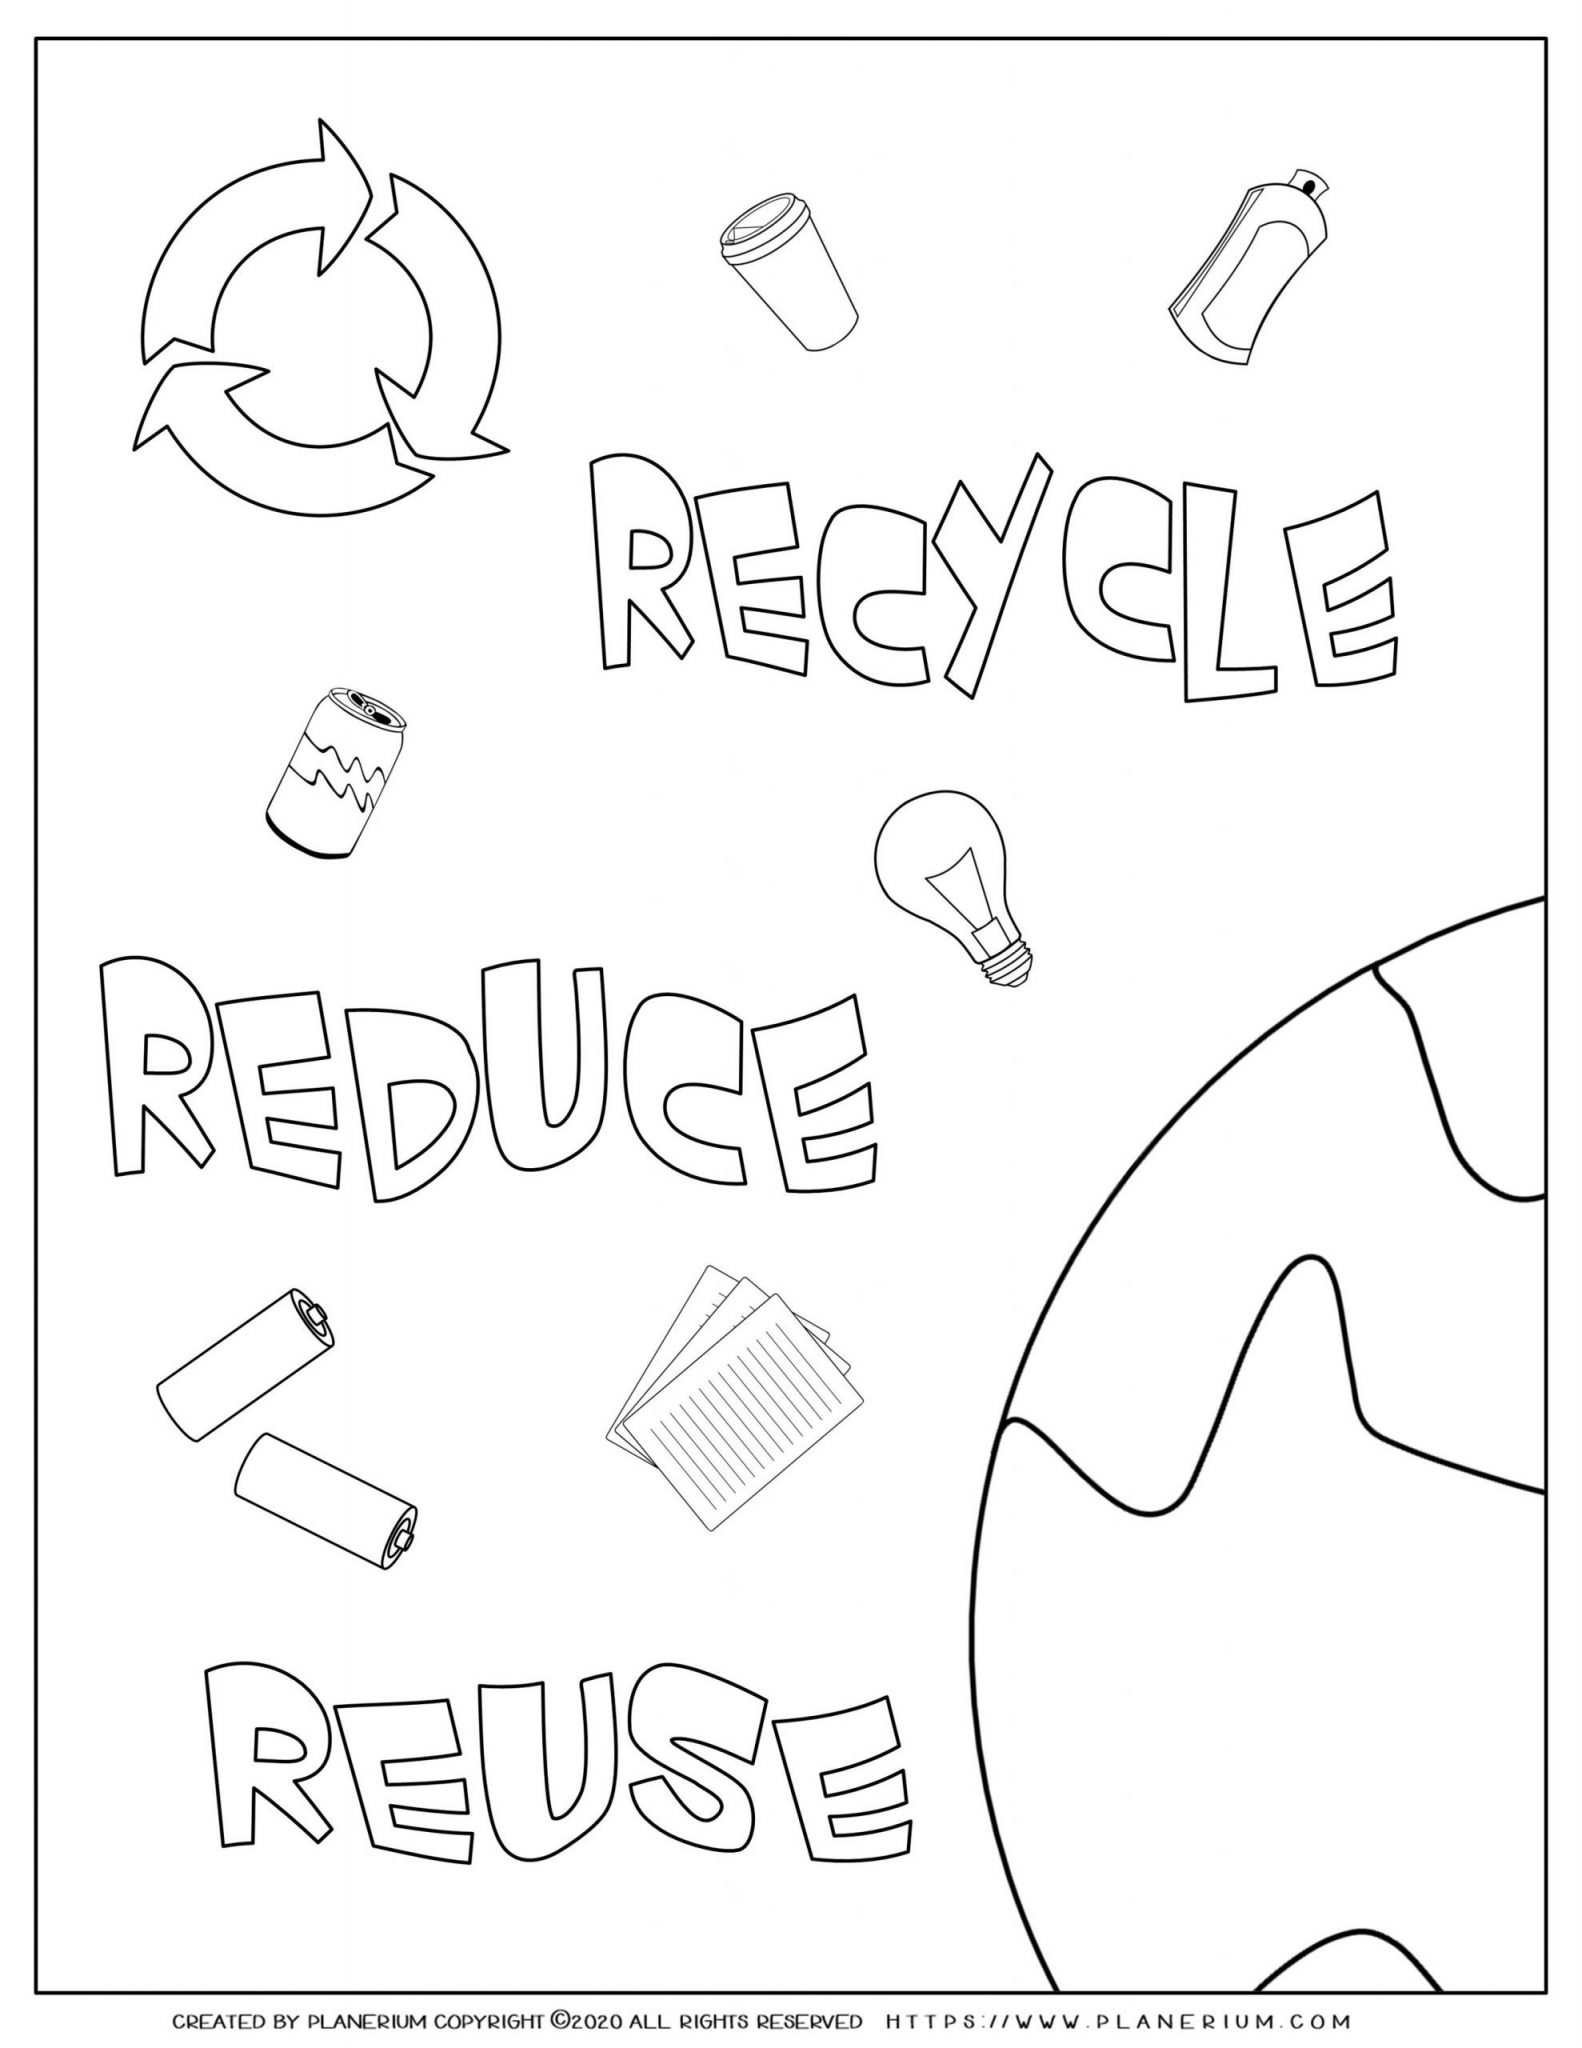 Earth Day - FREE Coloring Pages and Worksheets | Planerium